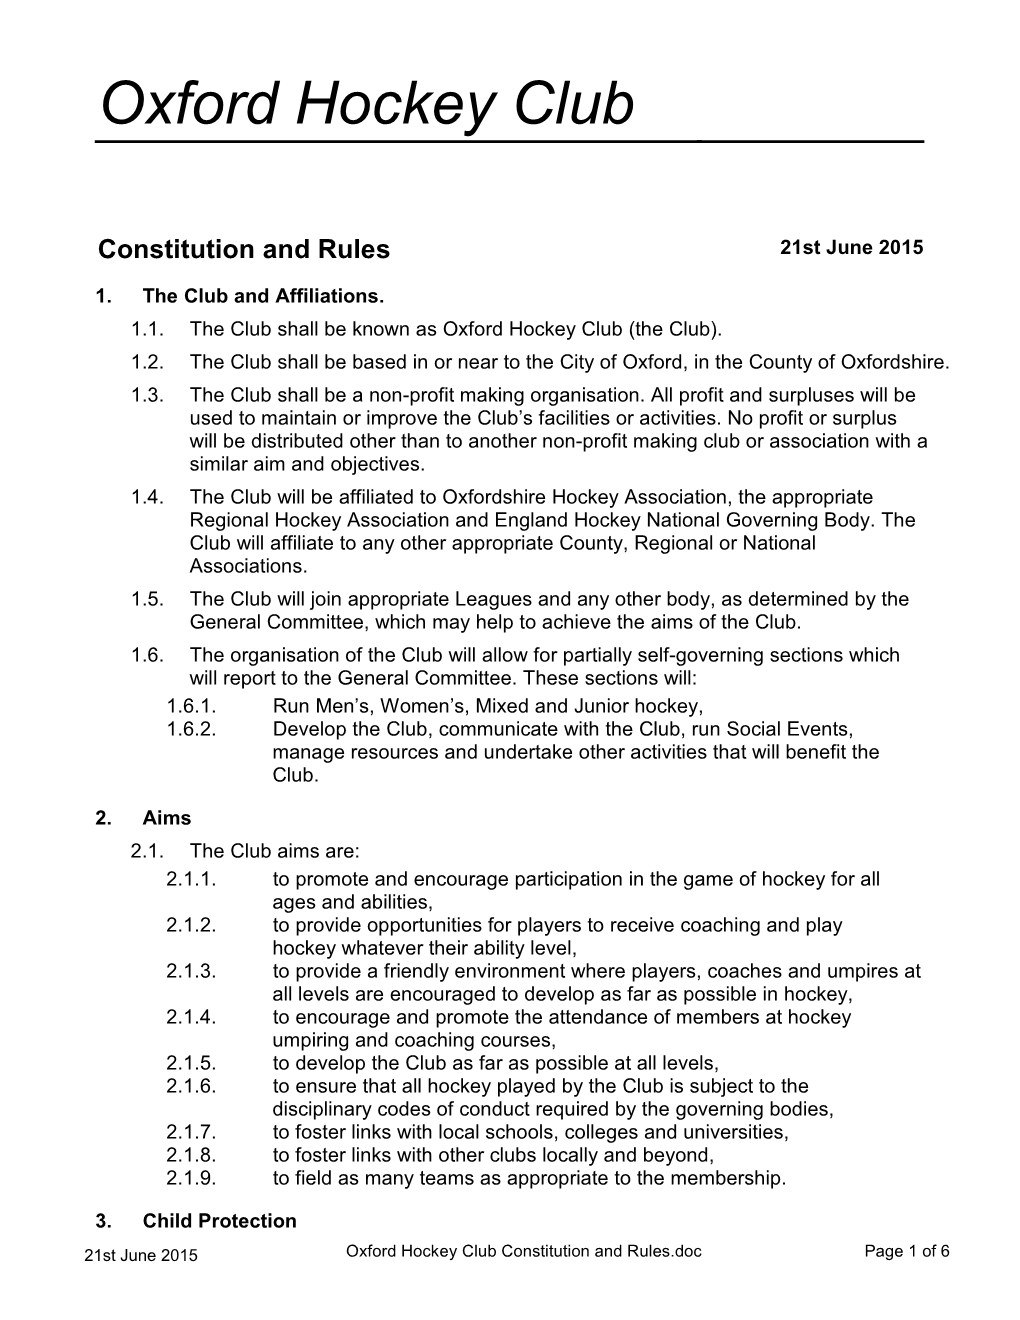 Oxford Hockey Club Constitution and Rules